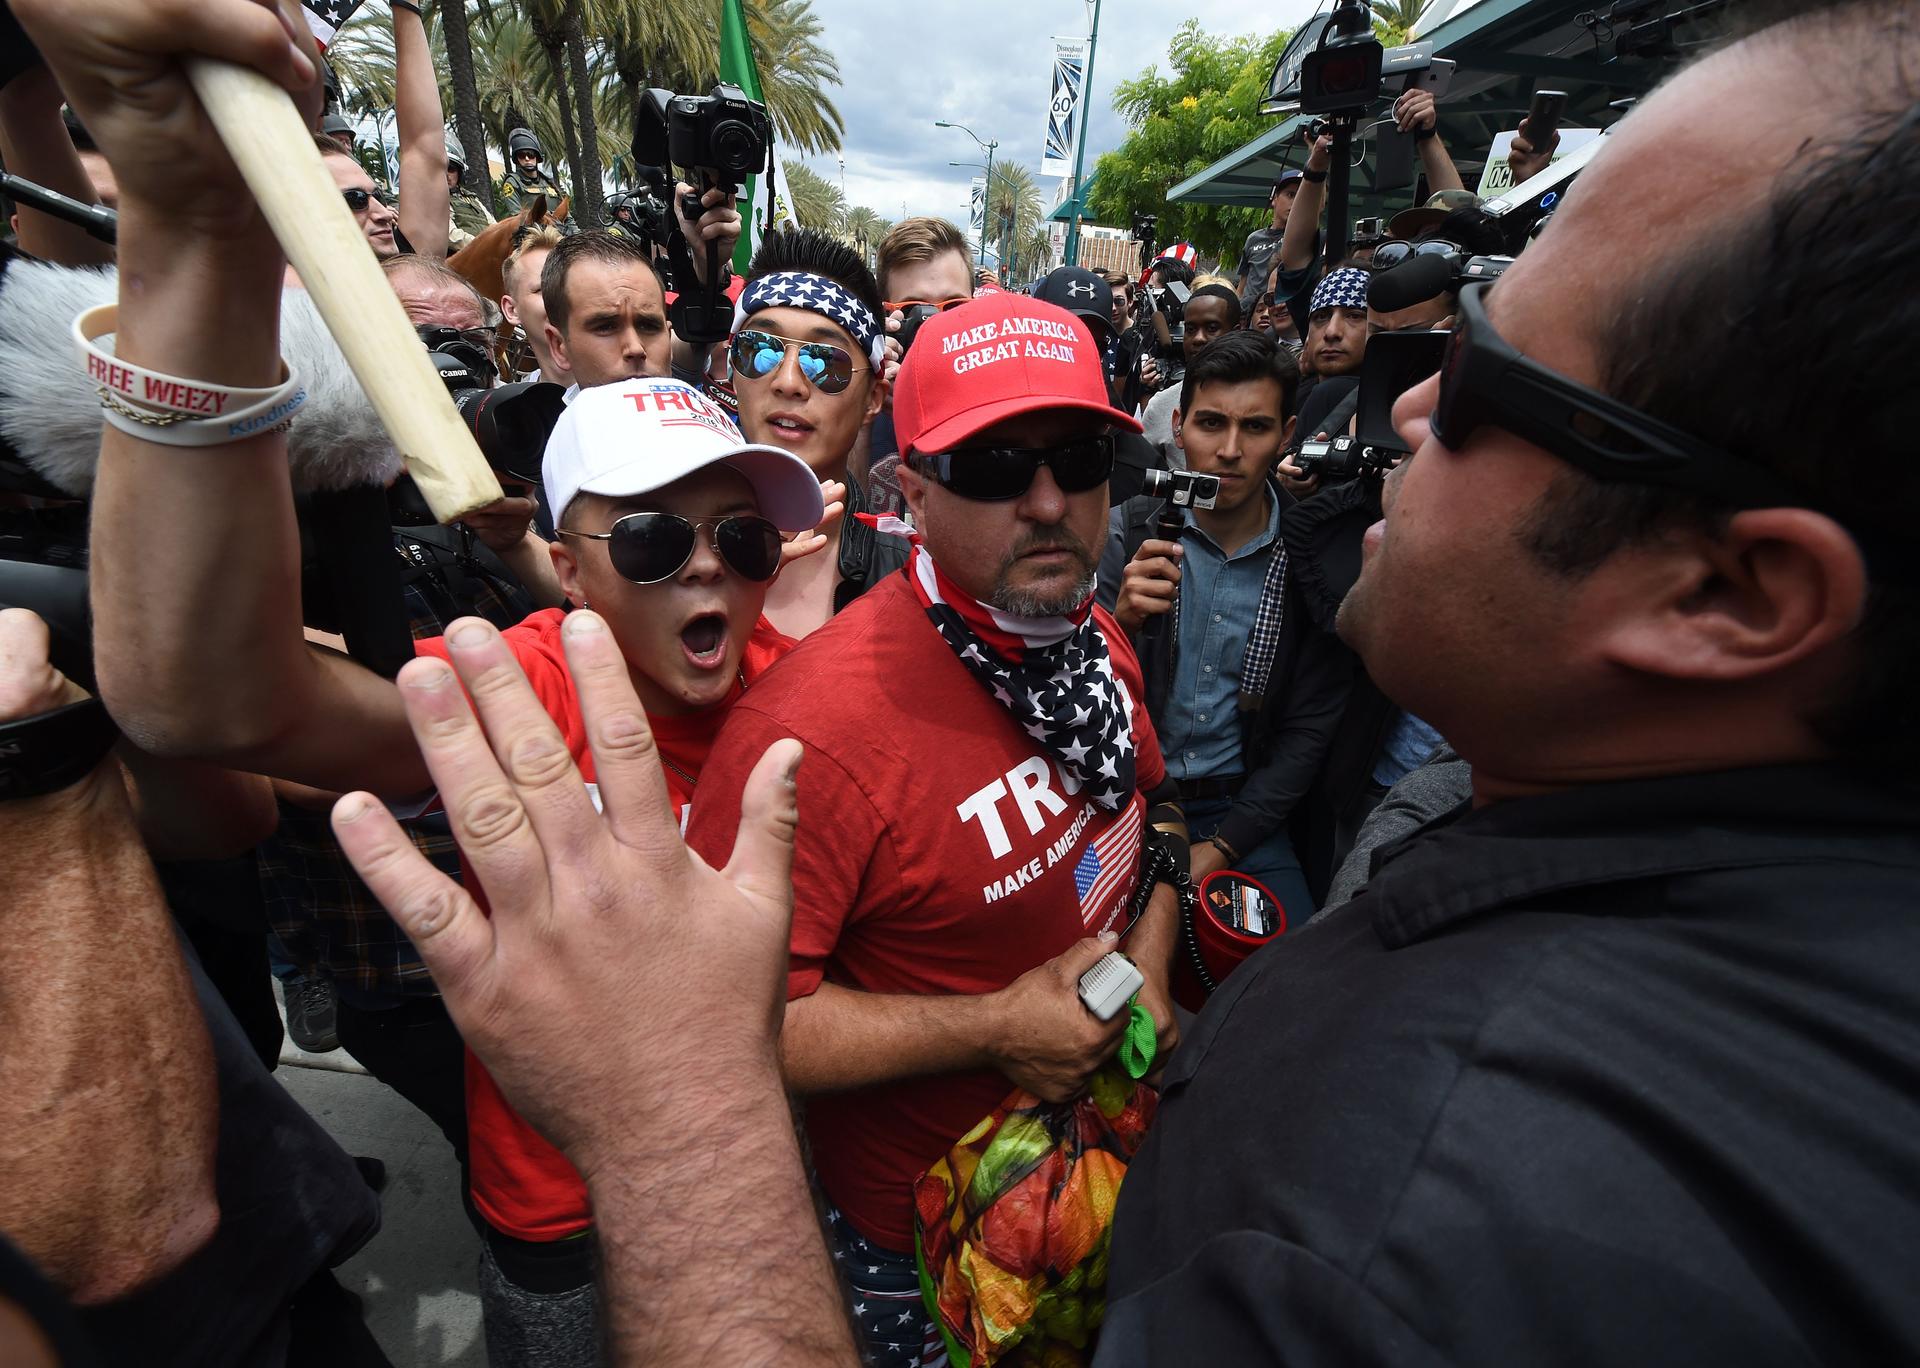 Anti-Trump protesters (R) clash with Donald Trump supporters (L) outside the Anaheim Convention Center during a rally for Republican presidential candidate Donald Trump on May 25, 2016 in Anaheim, California.